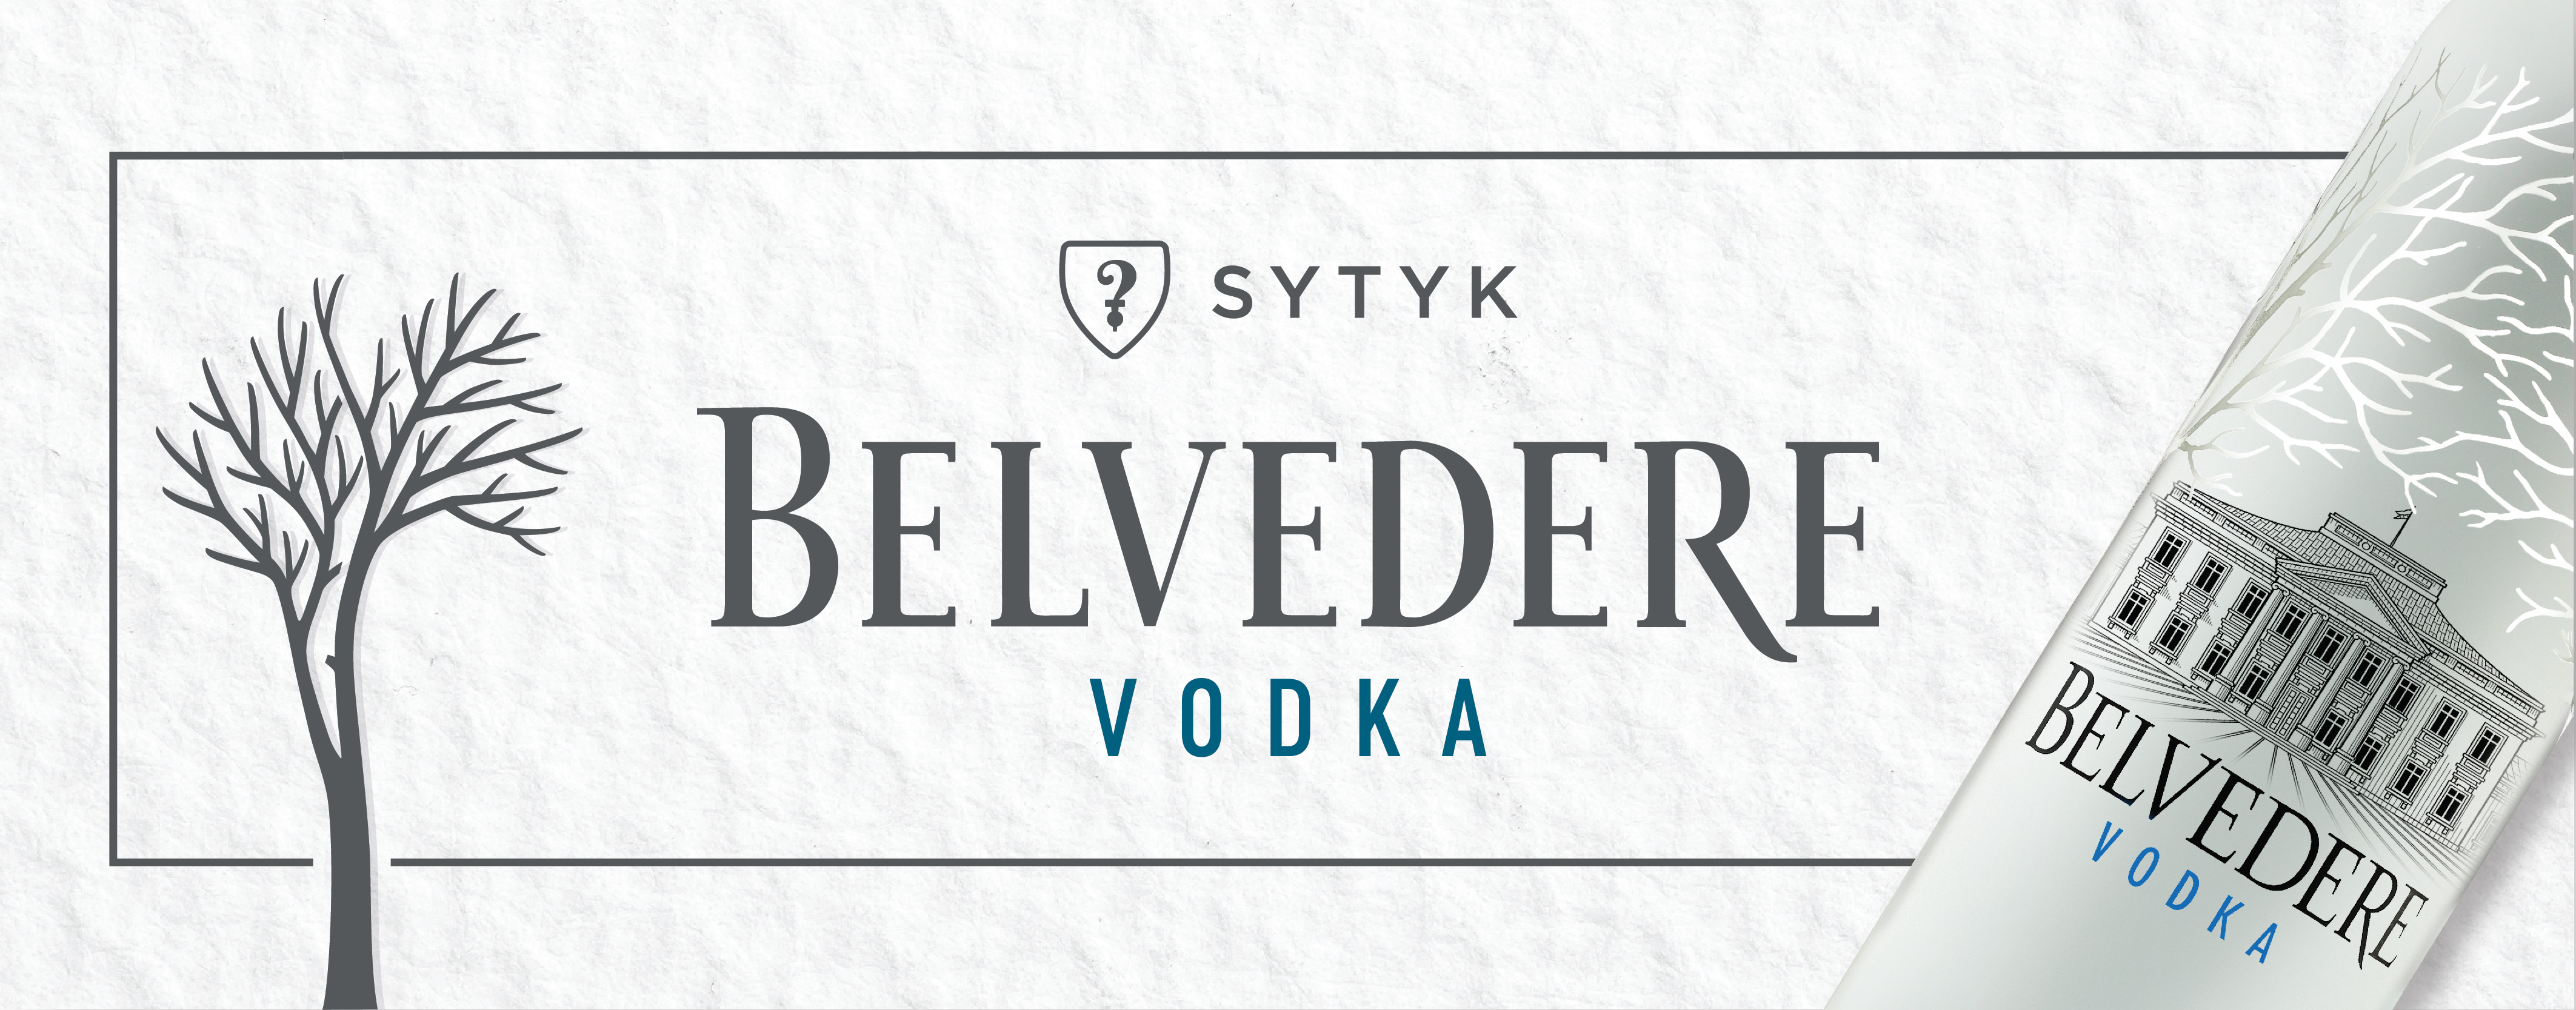 So, You Think You Know Belvedere? - Breakthru Beverage Group